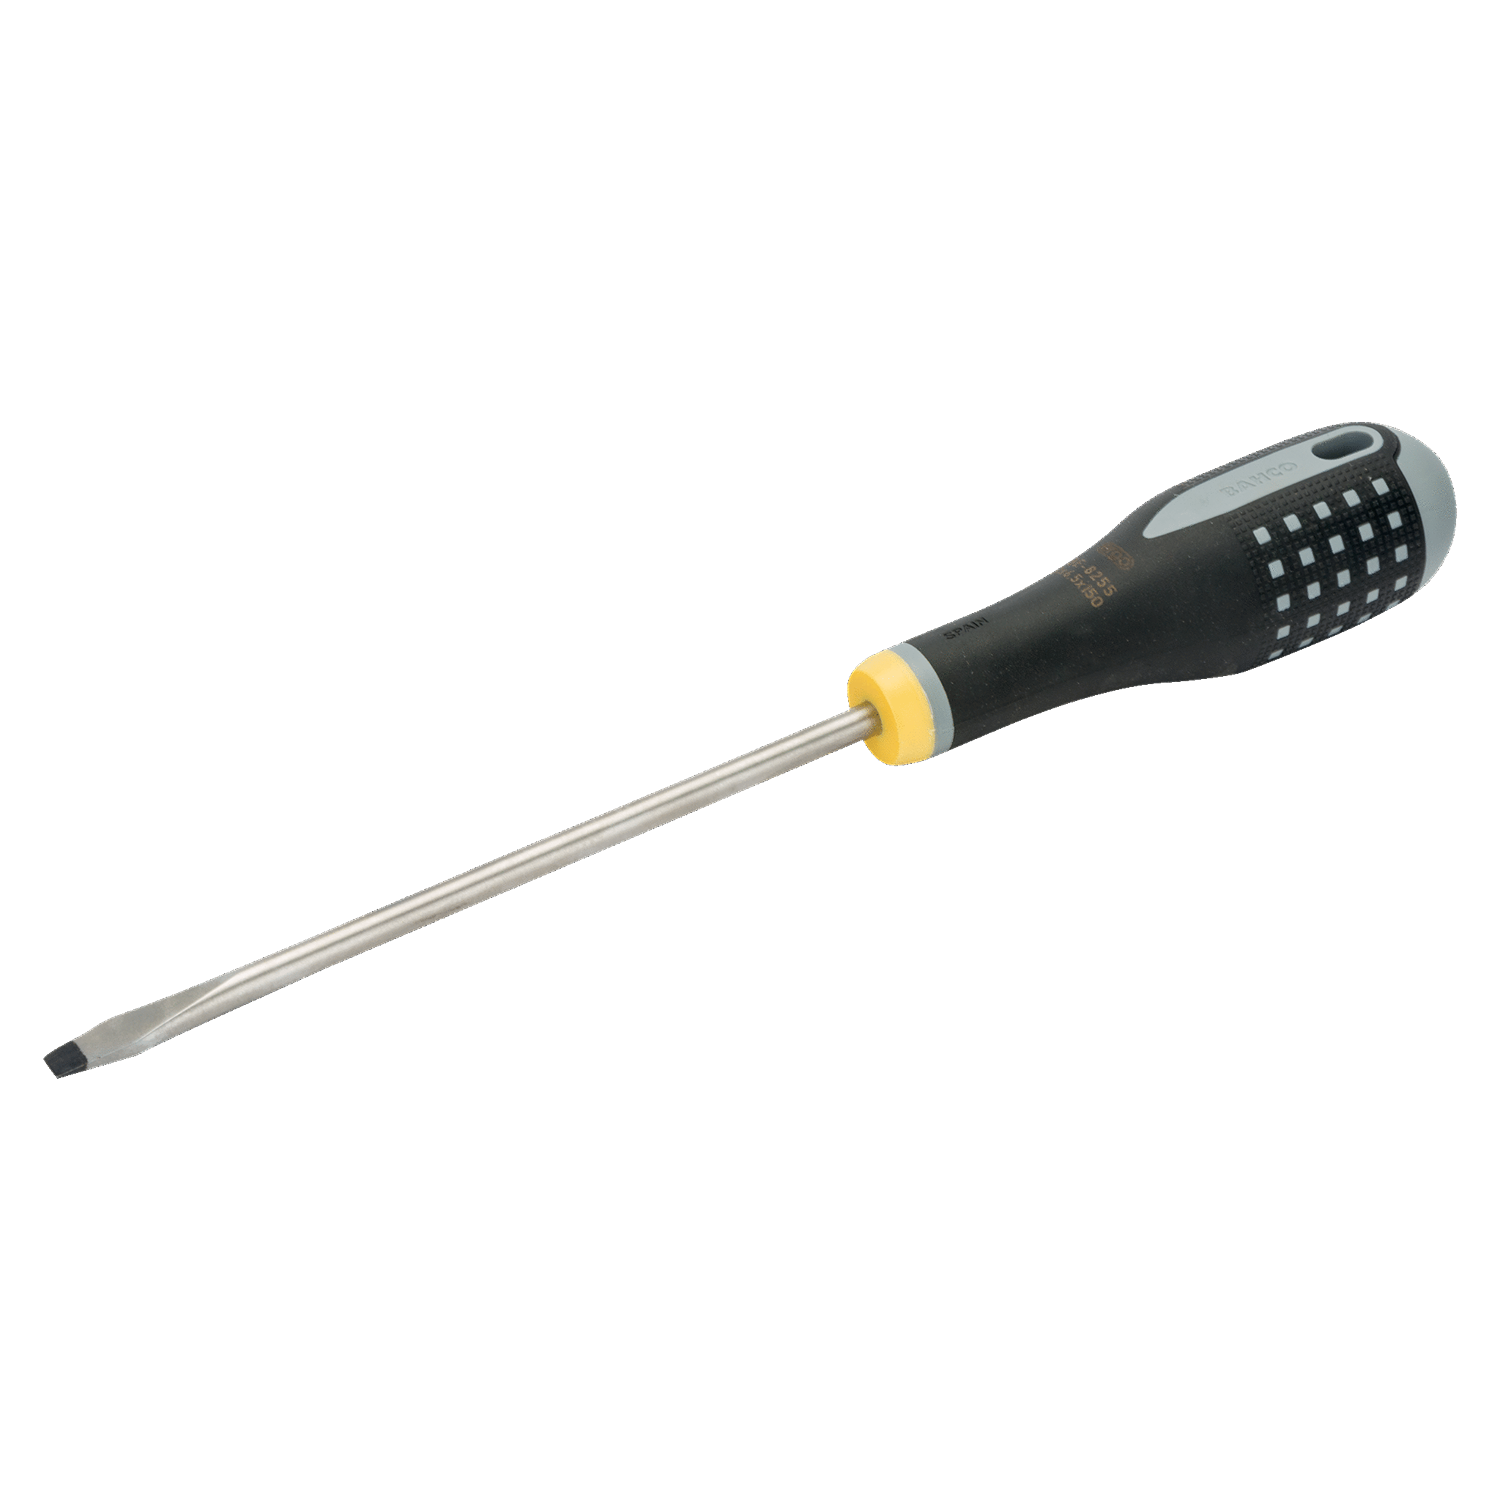 BAHCO BE-8150 BE-8258 ERGO Slotted Flat Tipped Screwdriver - Premium Flat Tipped Screwdriver from BAHCO - Shop now at Yew Aik.